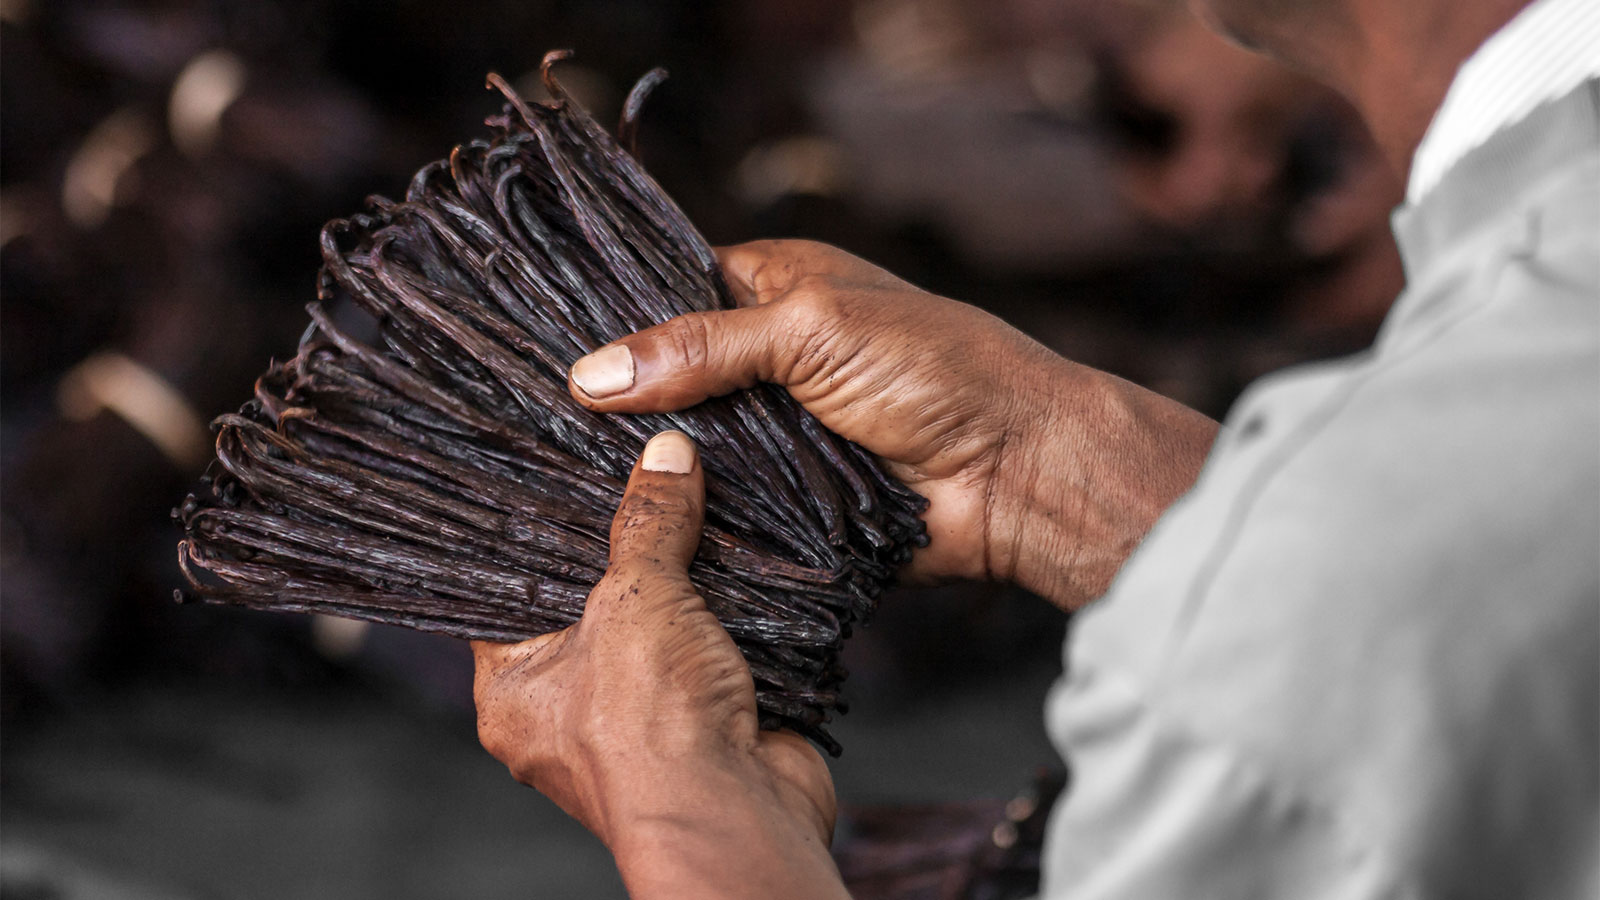 Over the shoulder view of hands holding dozens of vanilla bean pods